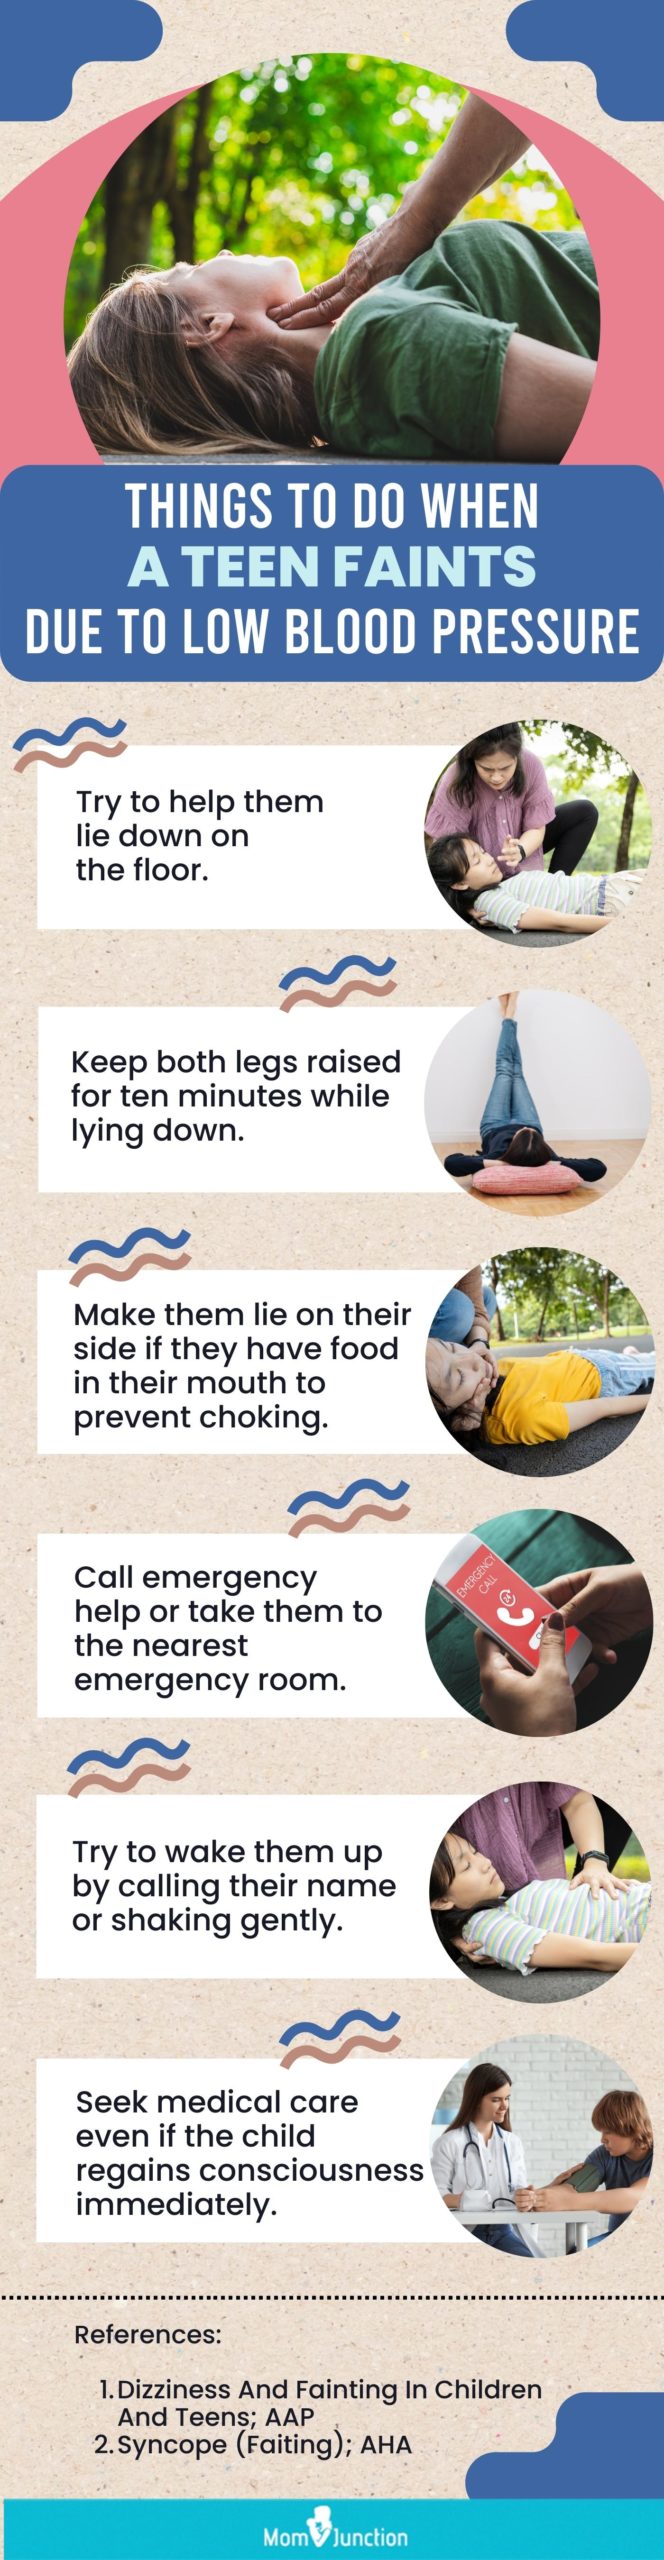 things to do when a teen faints due to low blood pressure 2 (infographic)